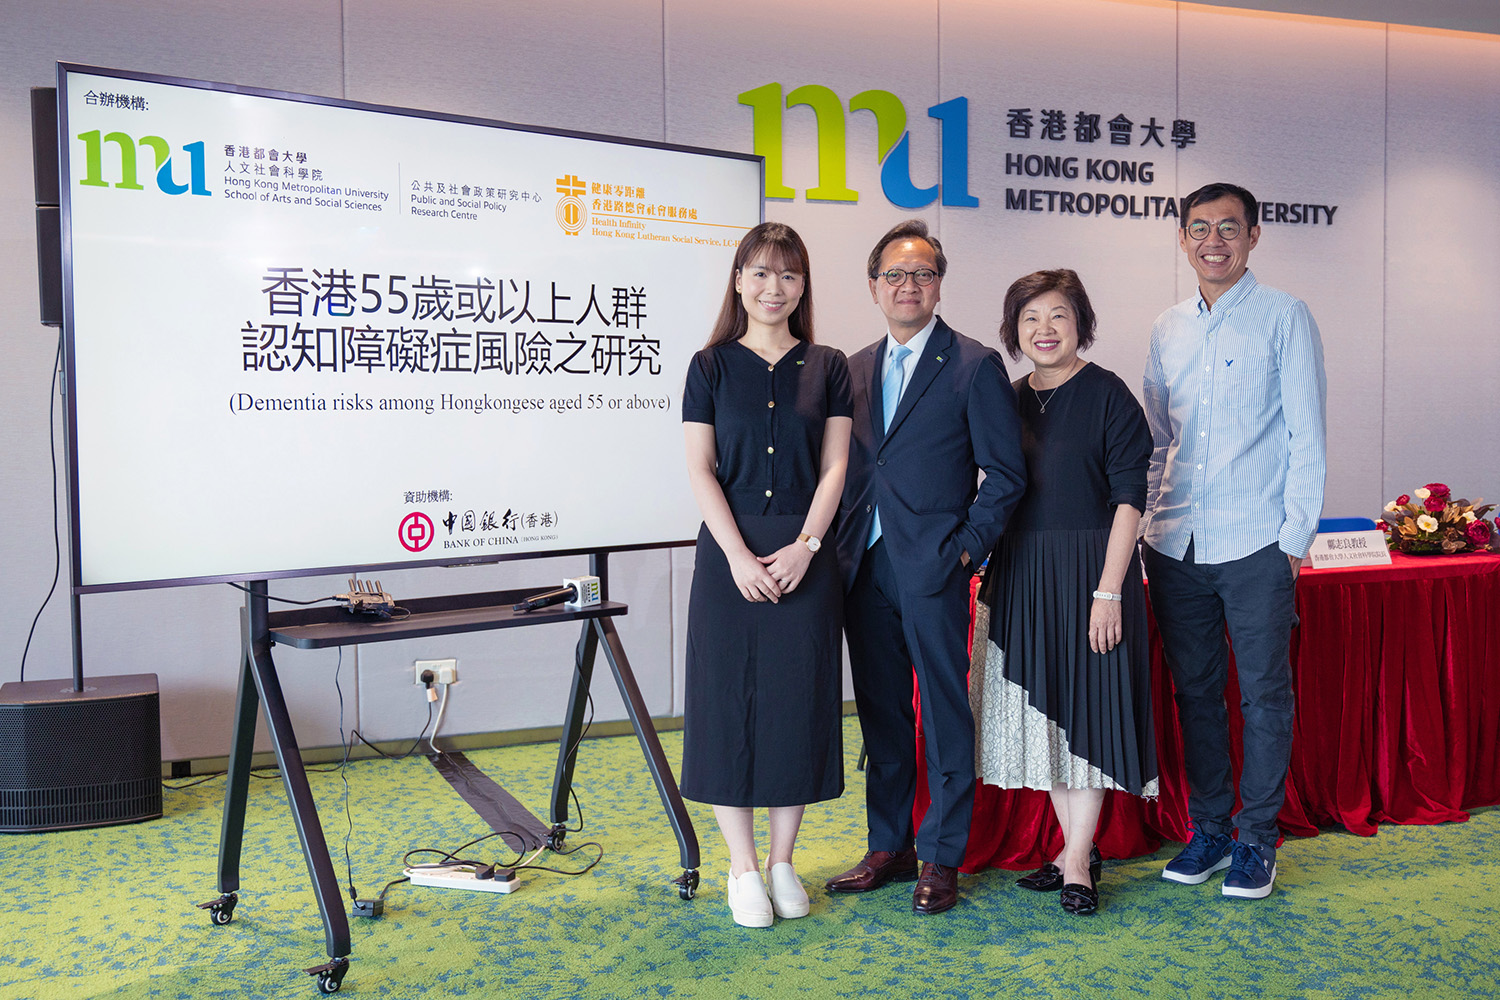 HKMU research team and HKLSS representatives: (from left) HKMU School of Arts and Social Sciences Lecturer Dr Vivian Tsang Hiu-ling, HKMU School of Arts and Social Sciences Dean Prof. Charles Kwong Che-leung, HKLSS Chief Executive Dr Annissa Lui Wai-ling, and HKLSS Service Director Mr Tang Kwok-hei.